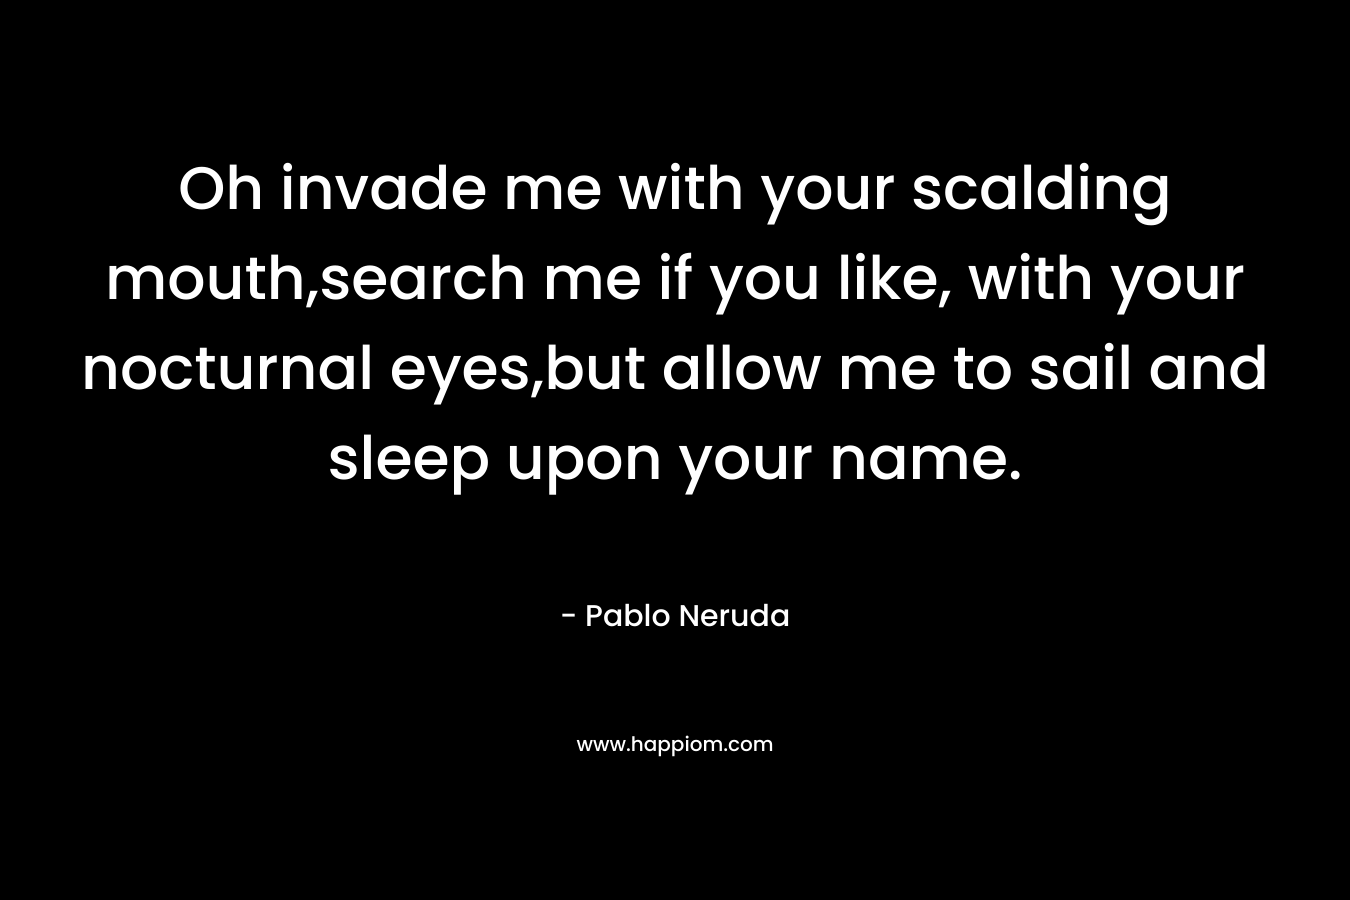 Oh invade me with your scalding mouth,search me if you like, with your nocturnal eyes,but allow me to sail and sleep upon your name. – Pablo Neruda